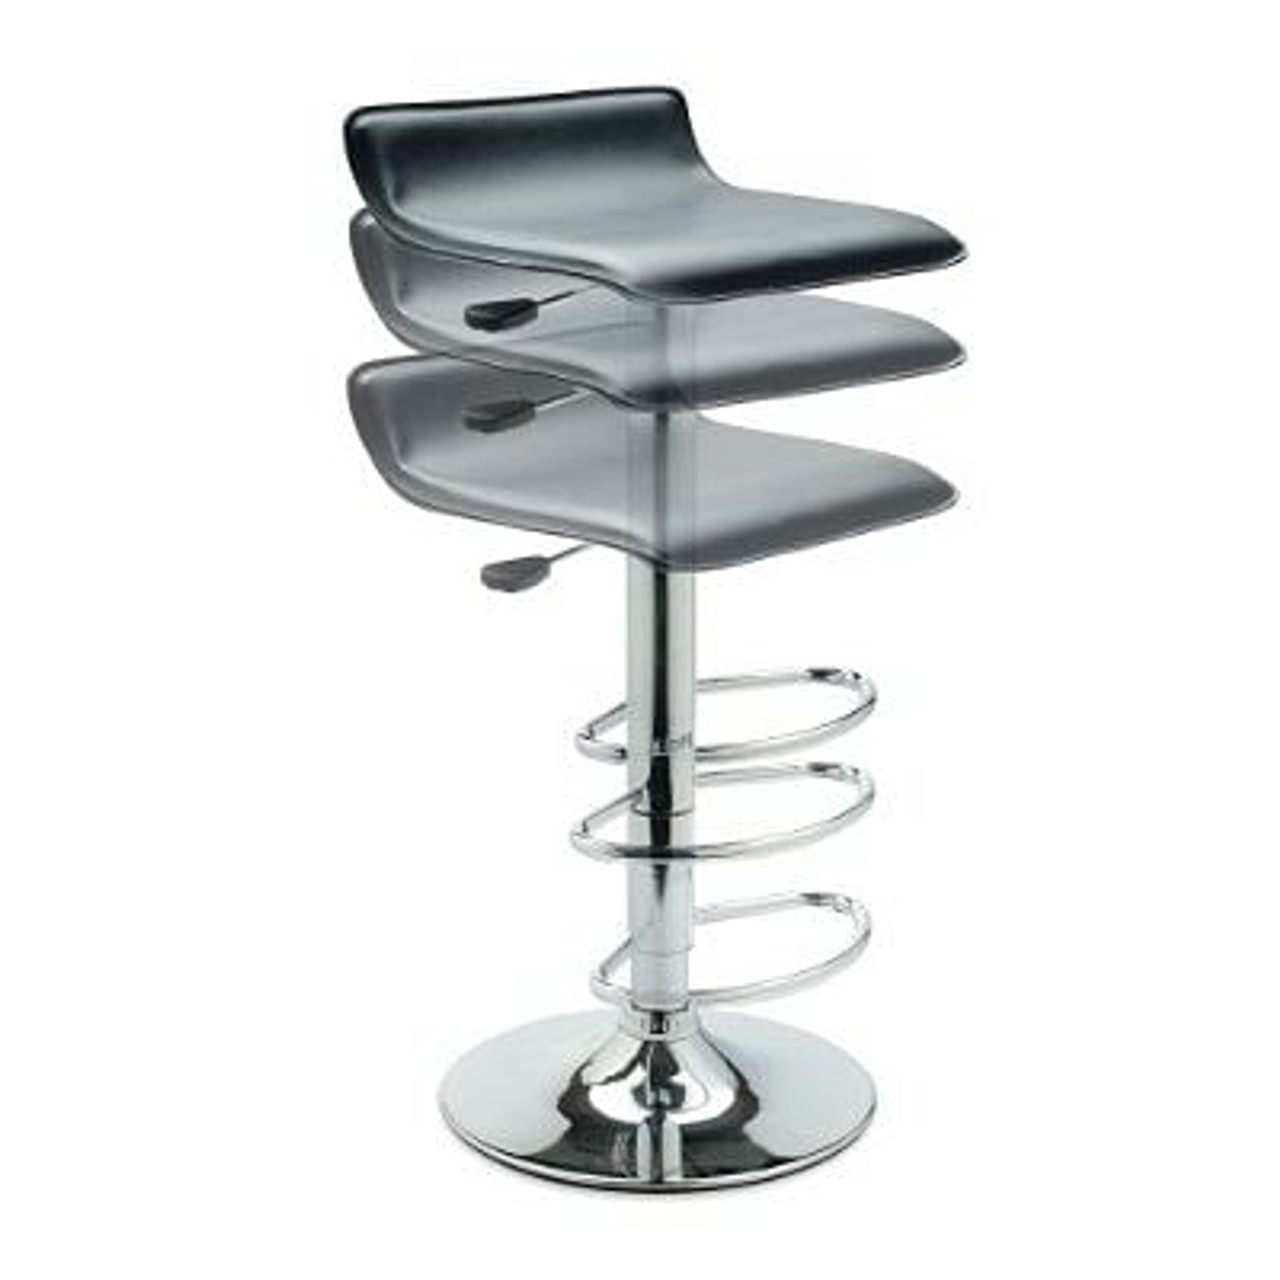 Contemporary ABS Air-Lift Swivel Bar Stool in Black Faux Leather